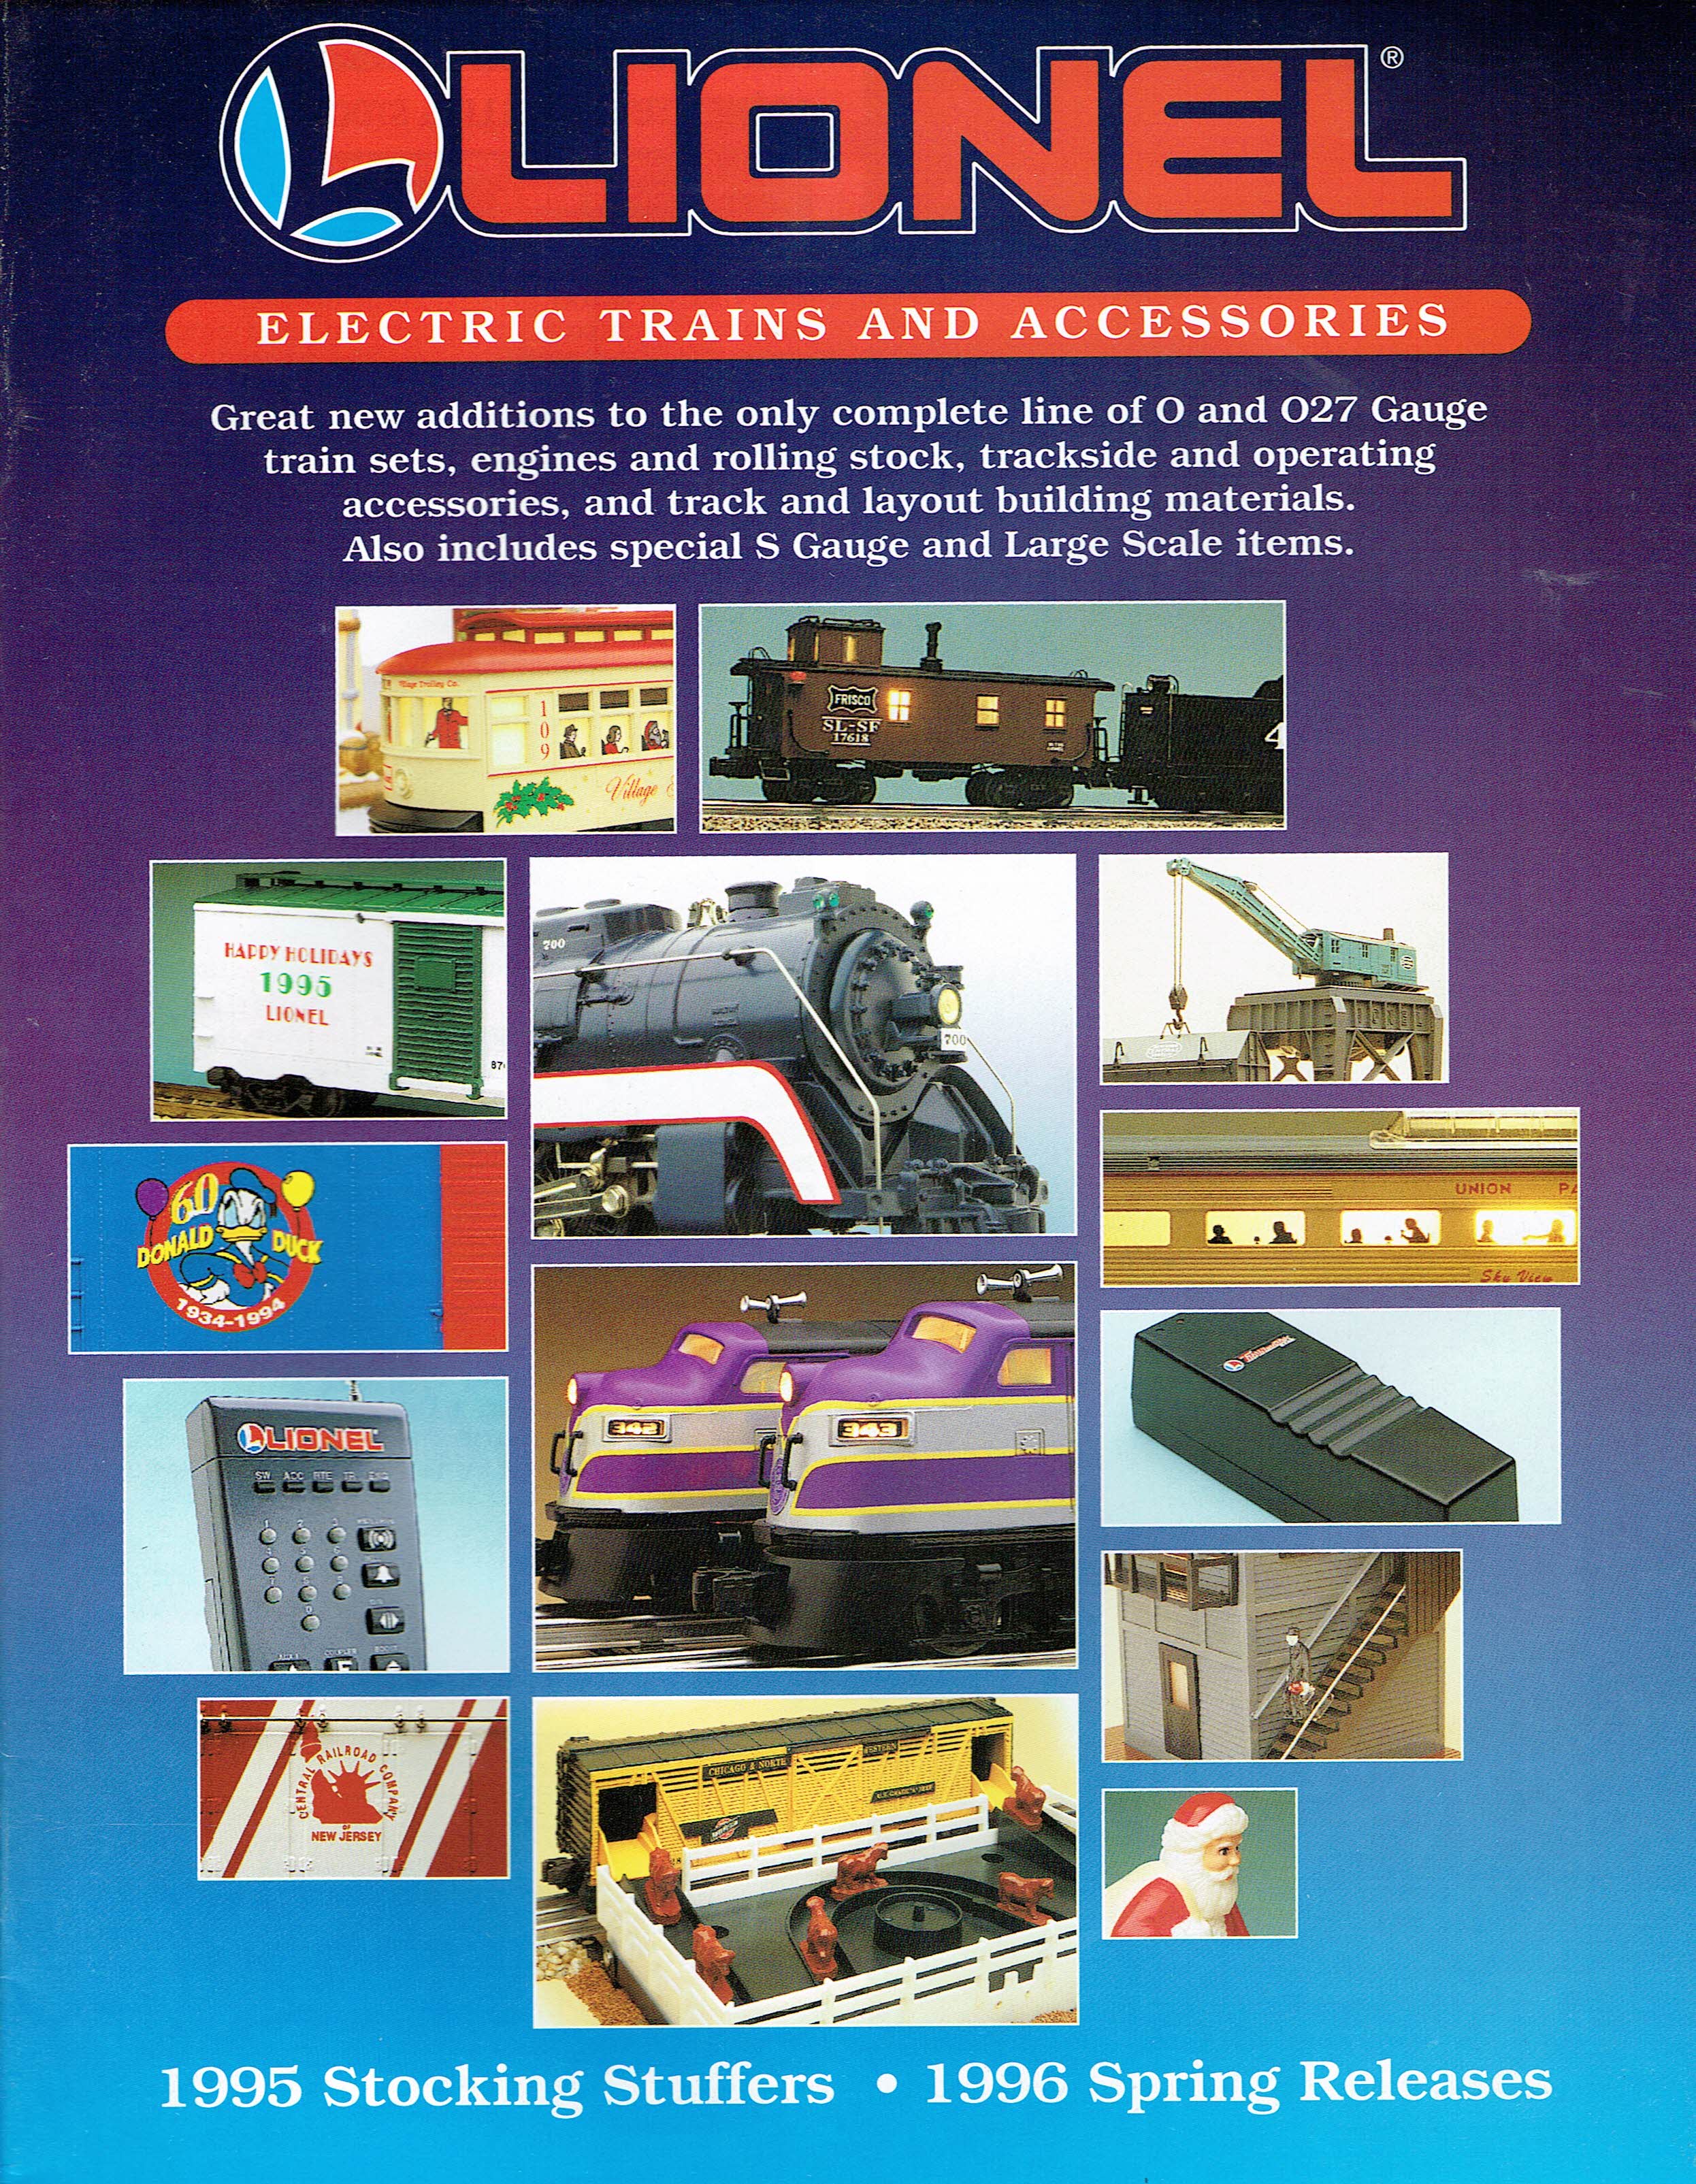 Lionel 1995 Stocking Stuffers / 1996 Spring Releases Catalog image